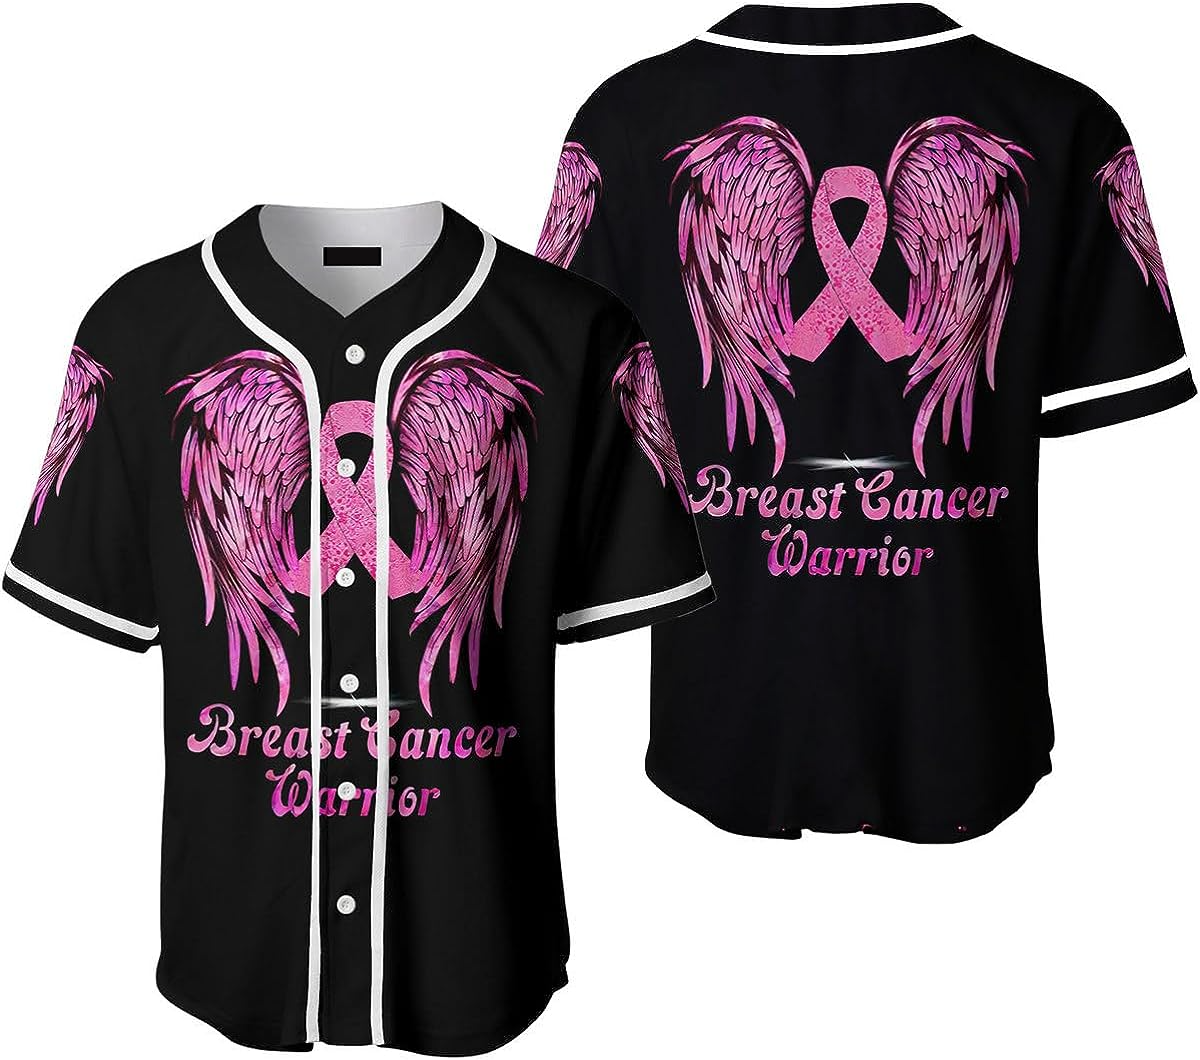 Pink Ribbon with Wings Baseball Jersey/ Breast Cancer Warrior 3D Shirt form Him Her